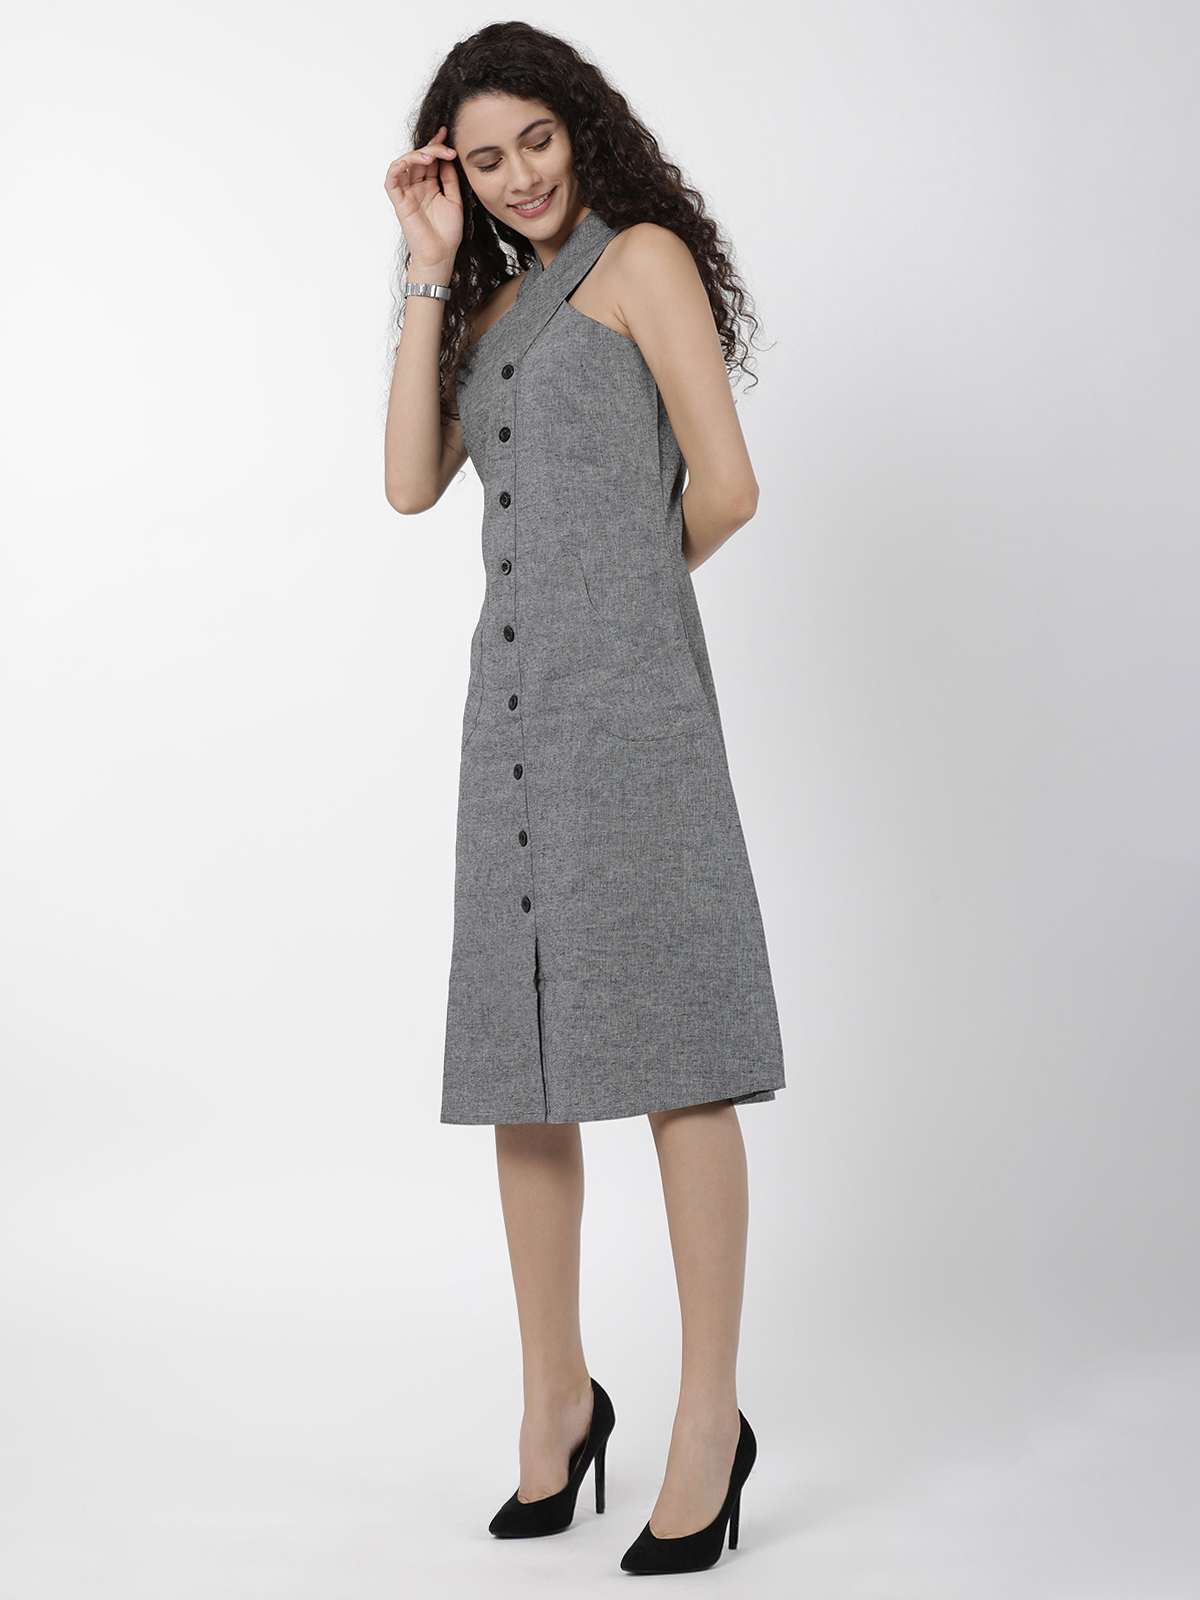 Solid Grey High Neck A Line One Piece Dress